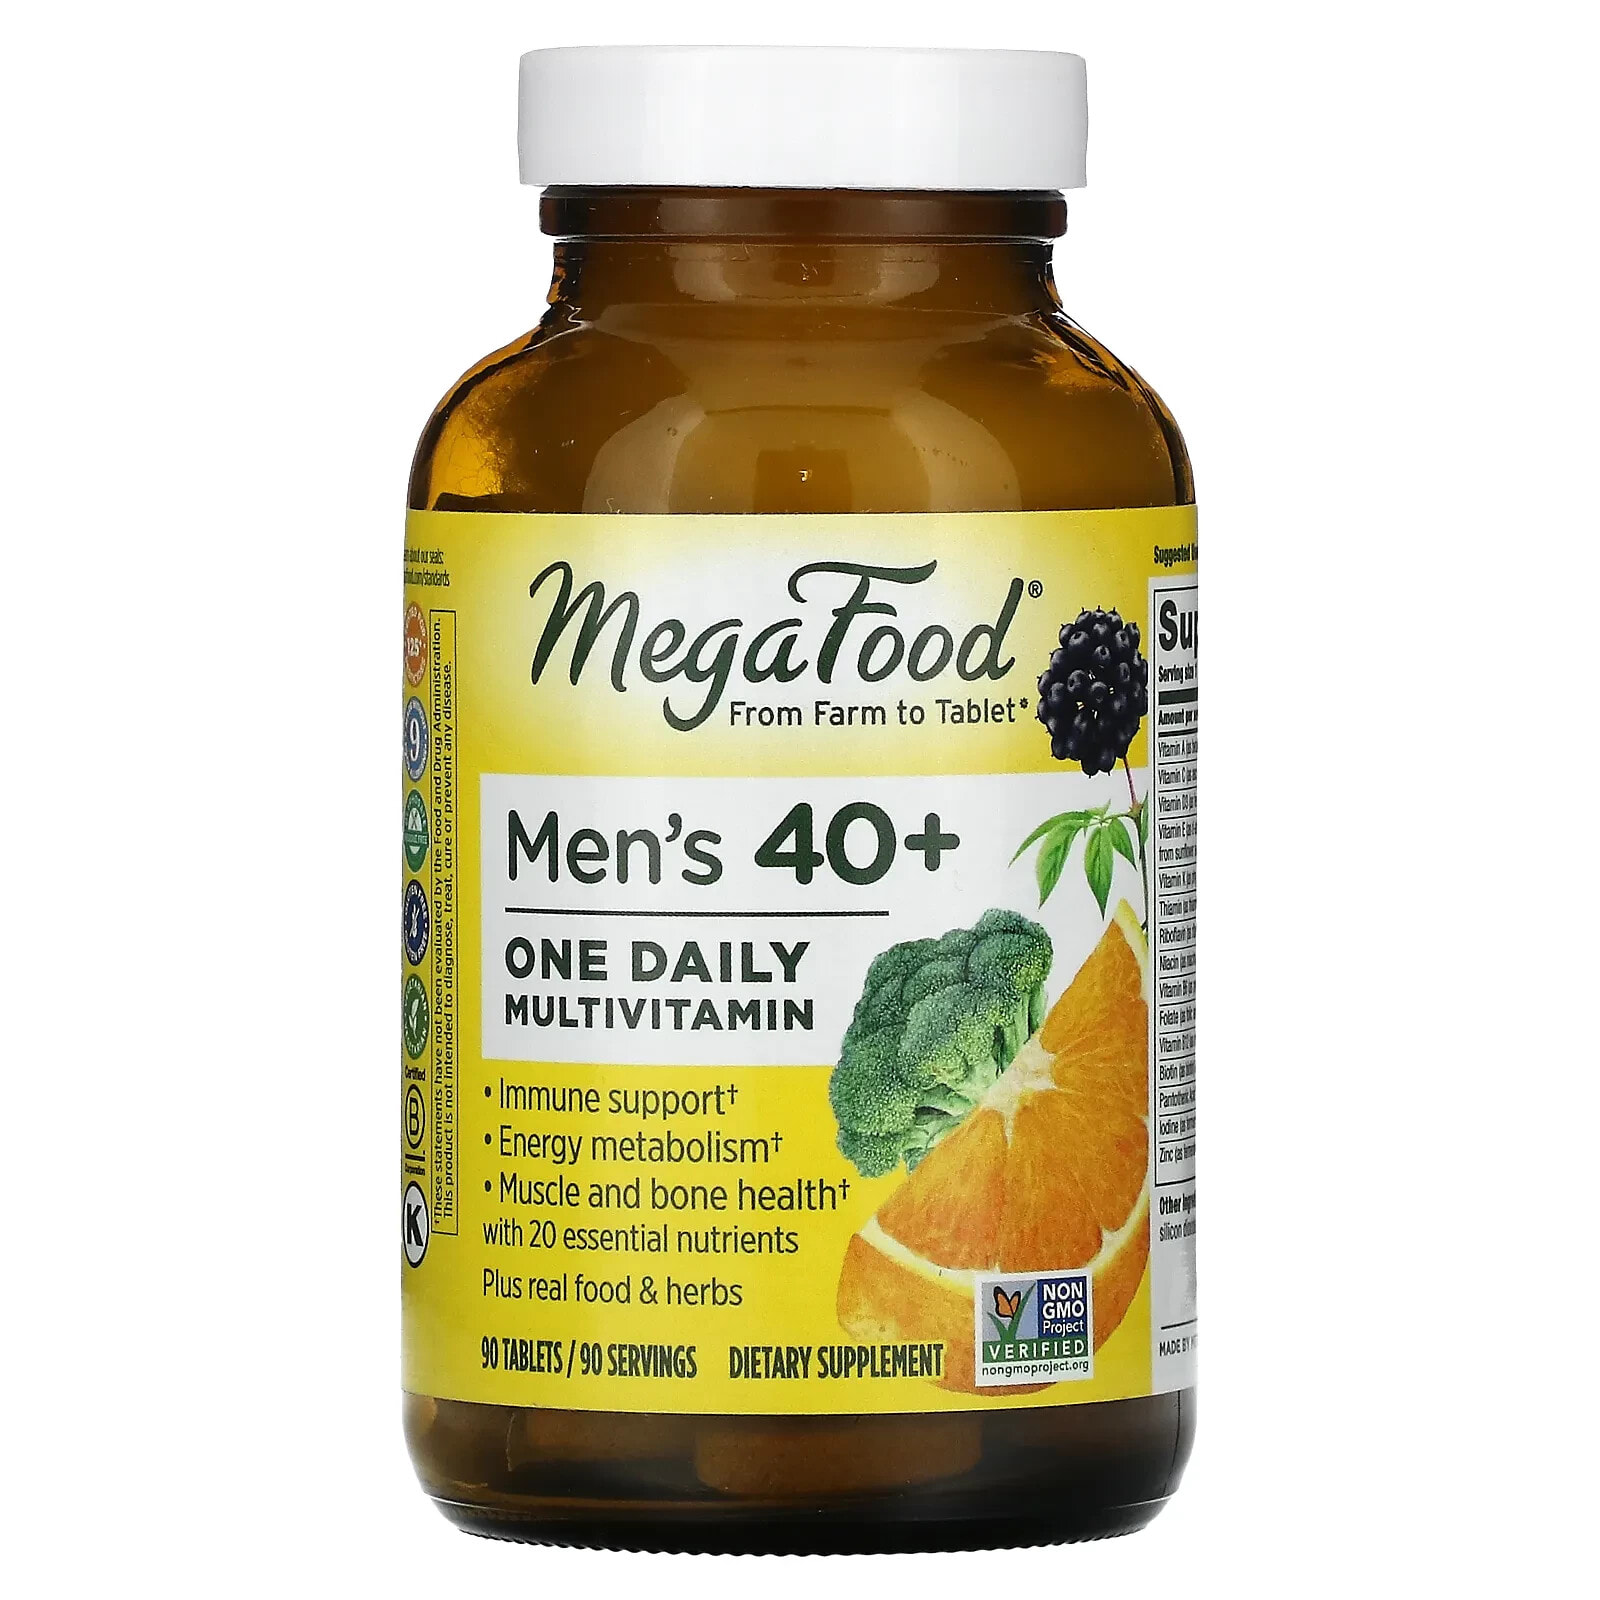 Men's 40+ One Daily Multivitamin, 60 Tablets